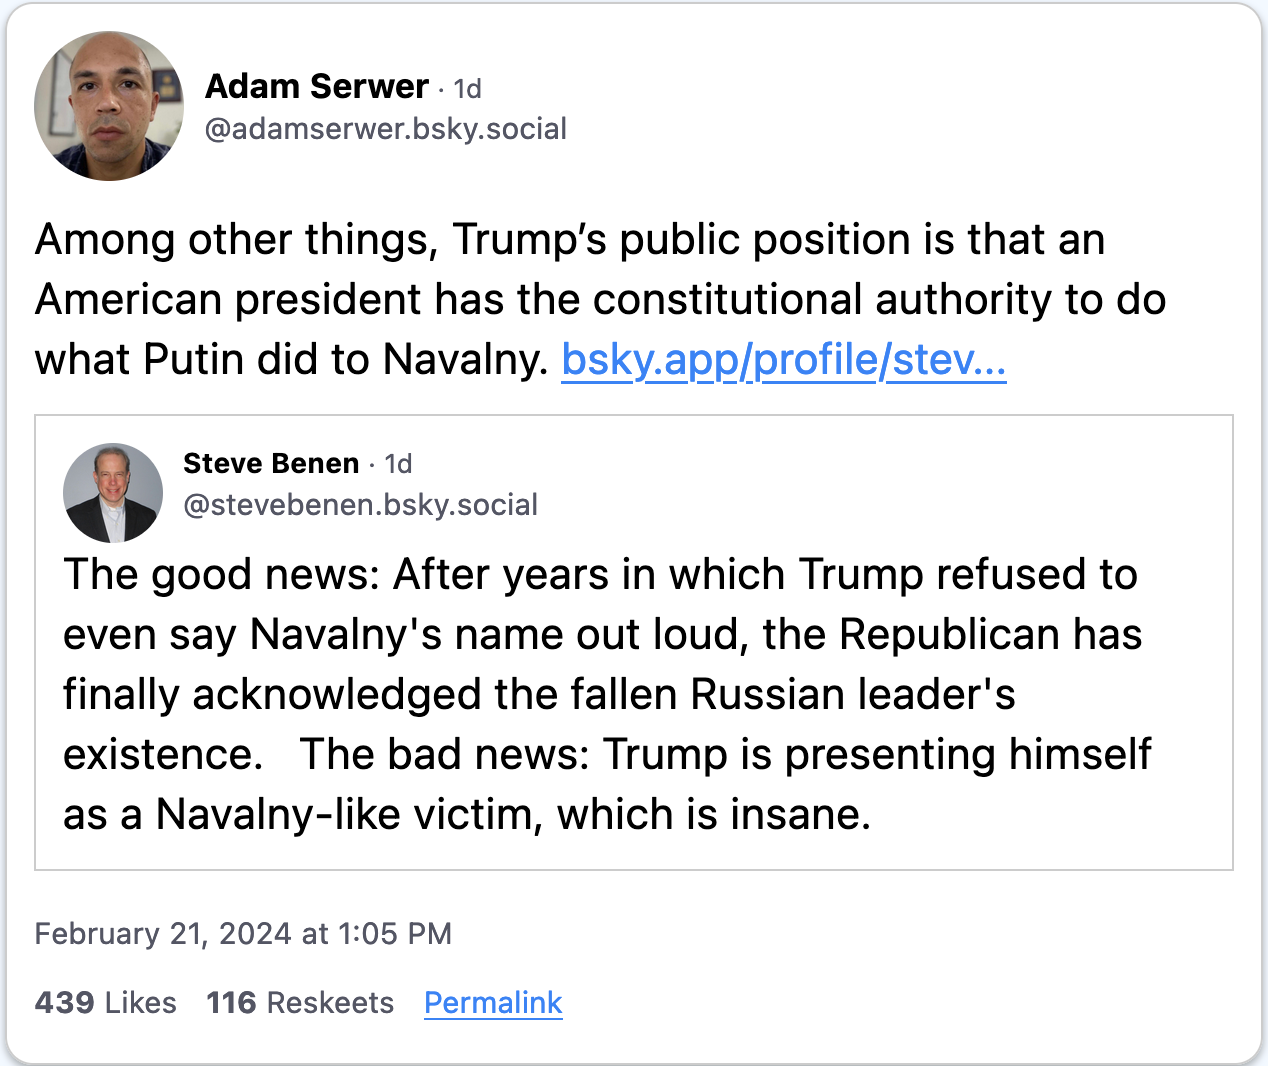 February 21, 2024 Bluesky post from Adam Serwer quoting a post from Steve Benen that reads, “The good news: After years in which Trump refused to even say Navalny's name out loud, the Republican has finally acknowledged the fallen Russian leader's existence. The bad news: Trump is presenting himself as a Navalny-like victim, which is insane.” Serwer adds, “Among other things, Trump’s public position is that an American president has the constitutional authority to do what Putin did to Navalny.”